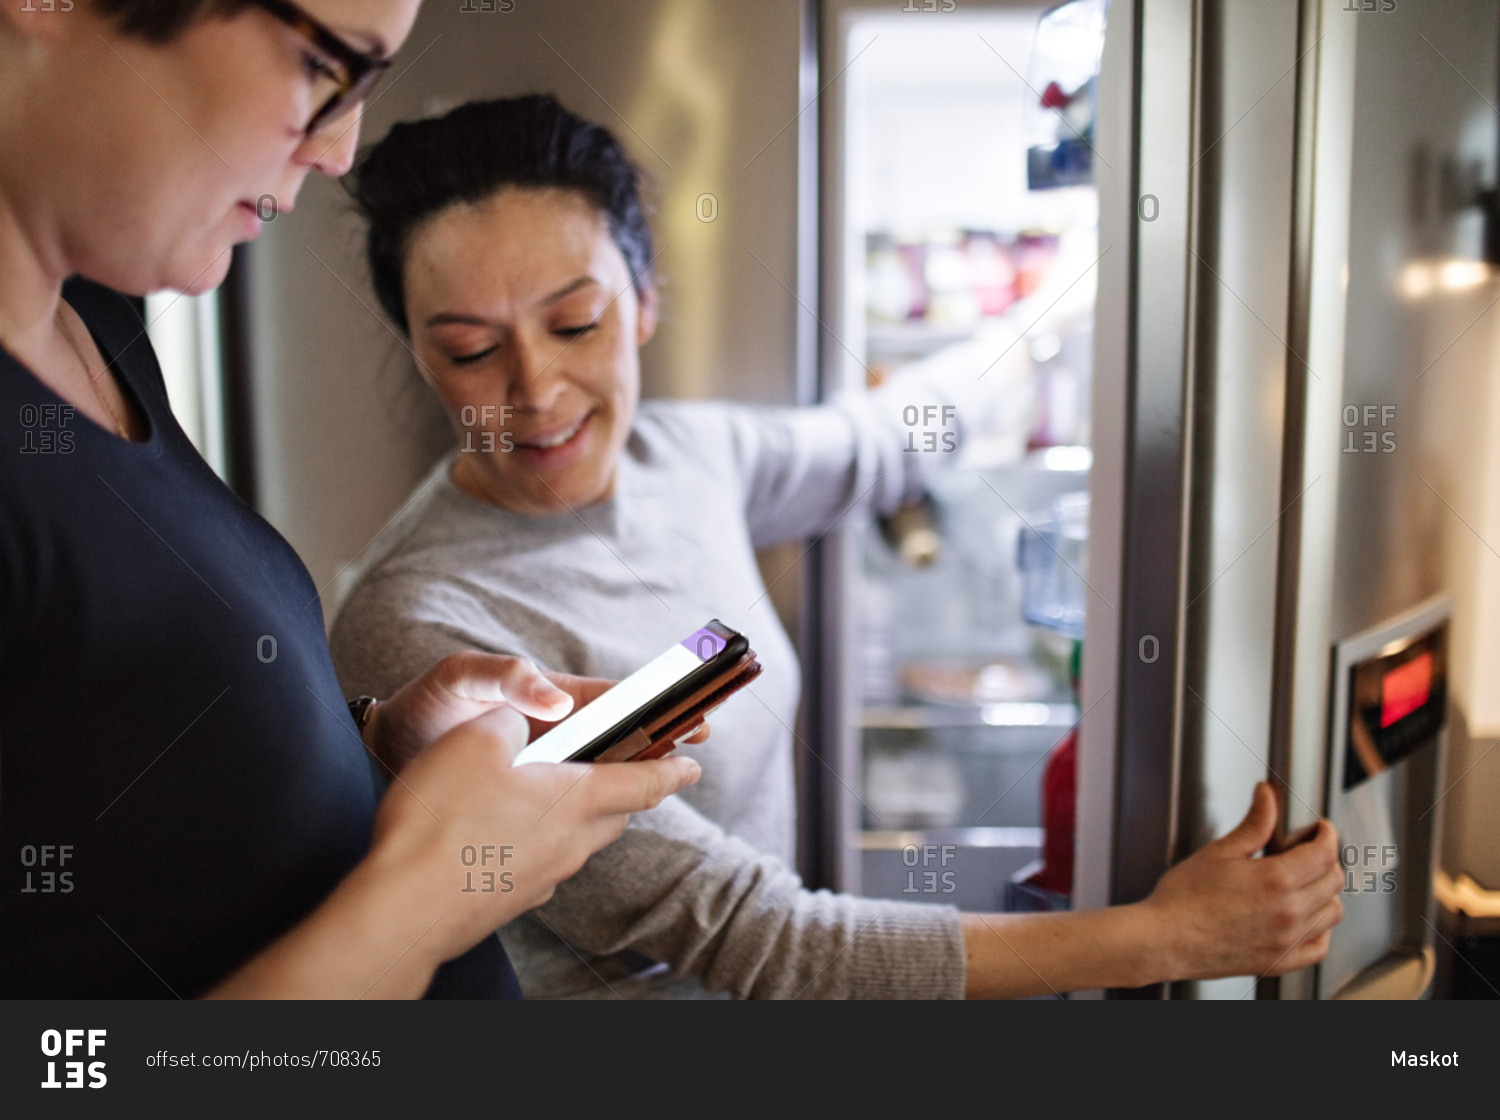 Woman showing mobile phone while girlfriend opening refrigerator in kitchen